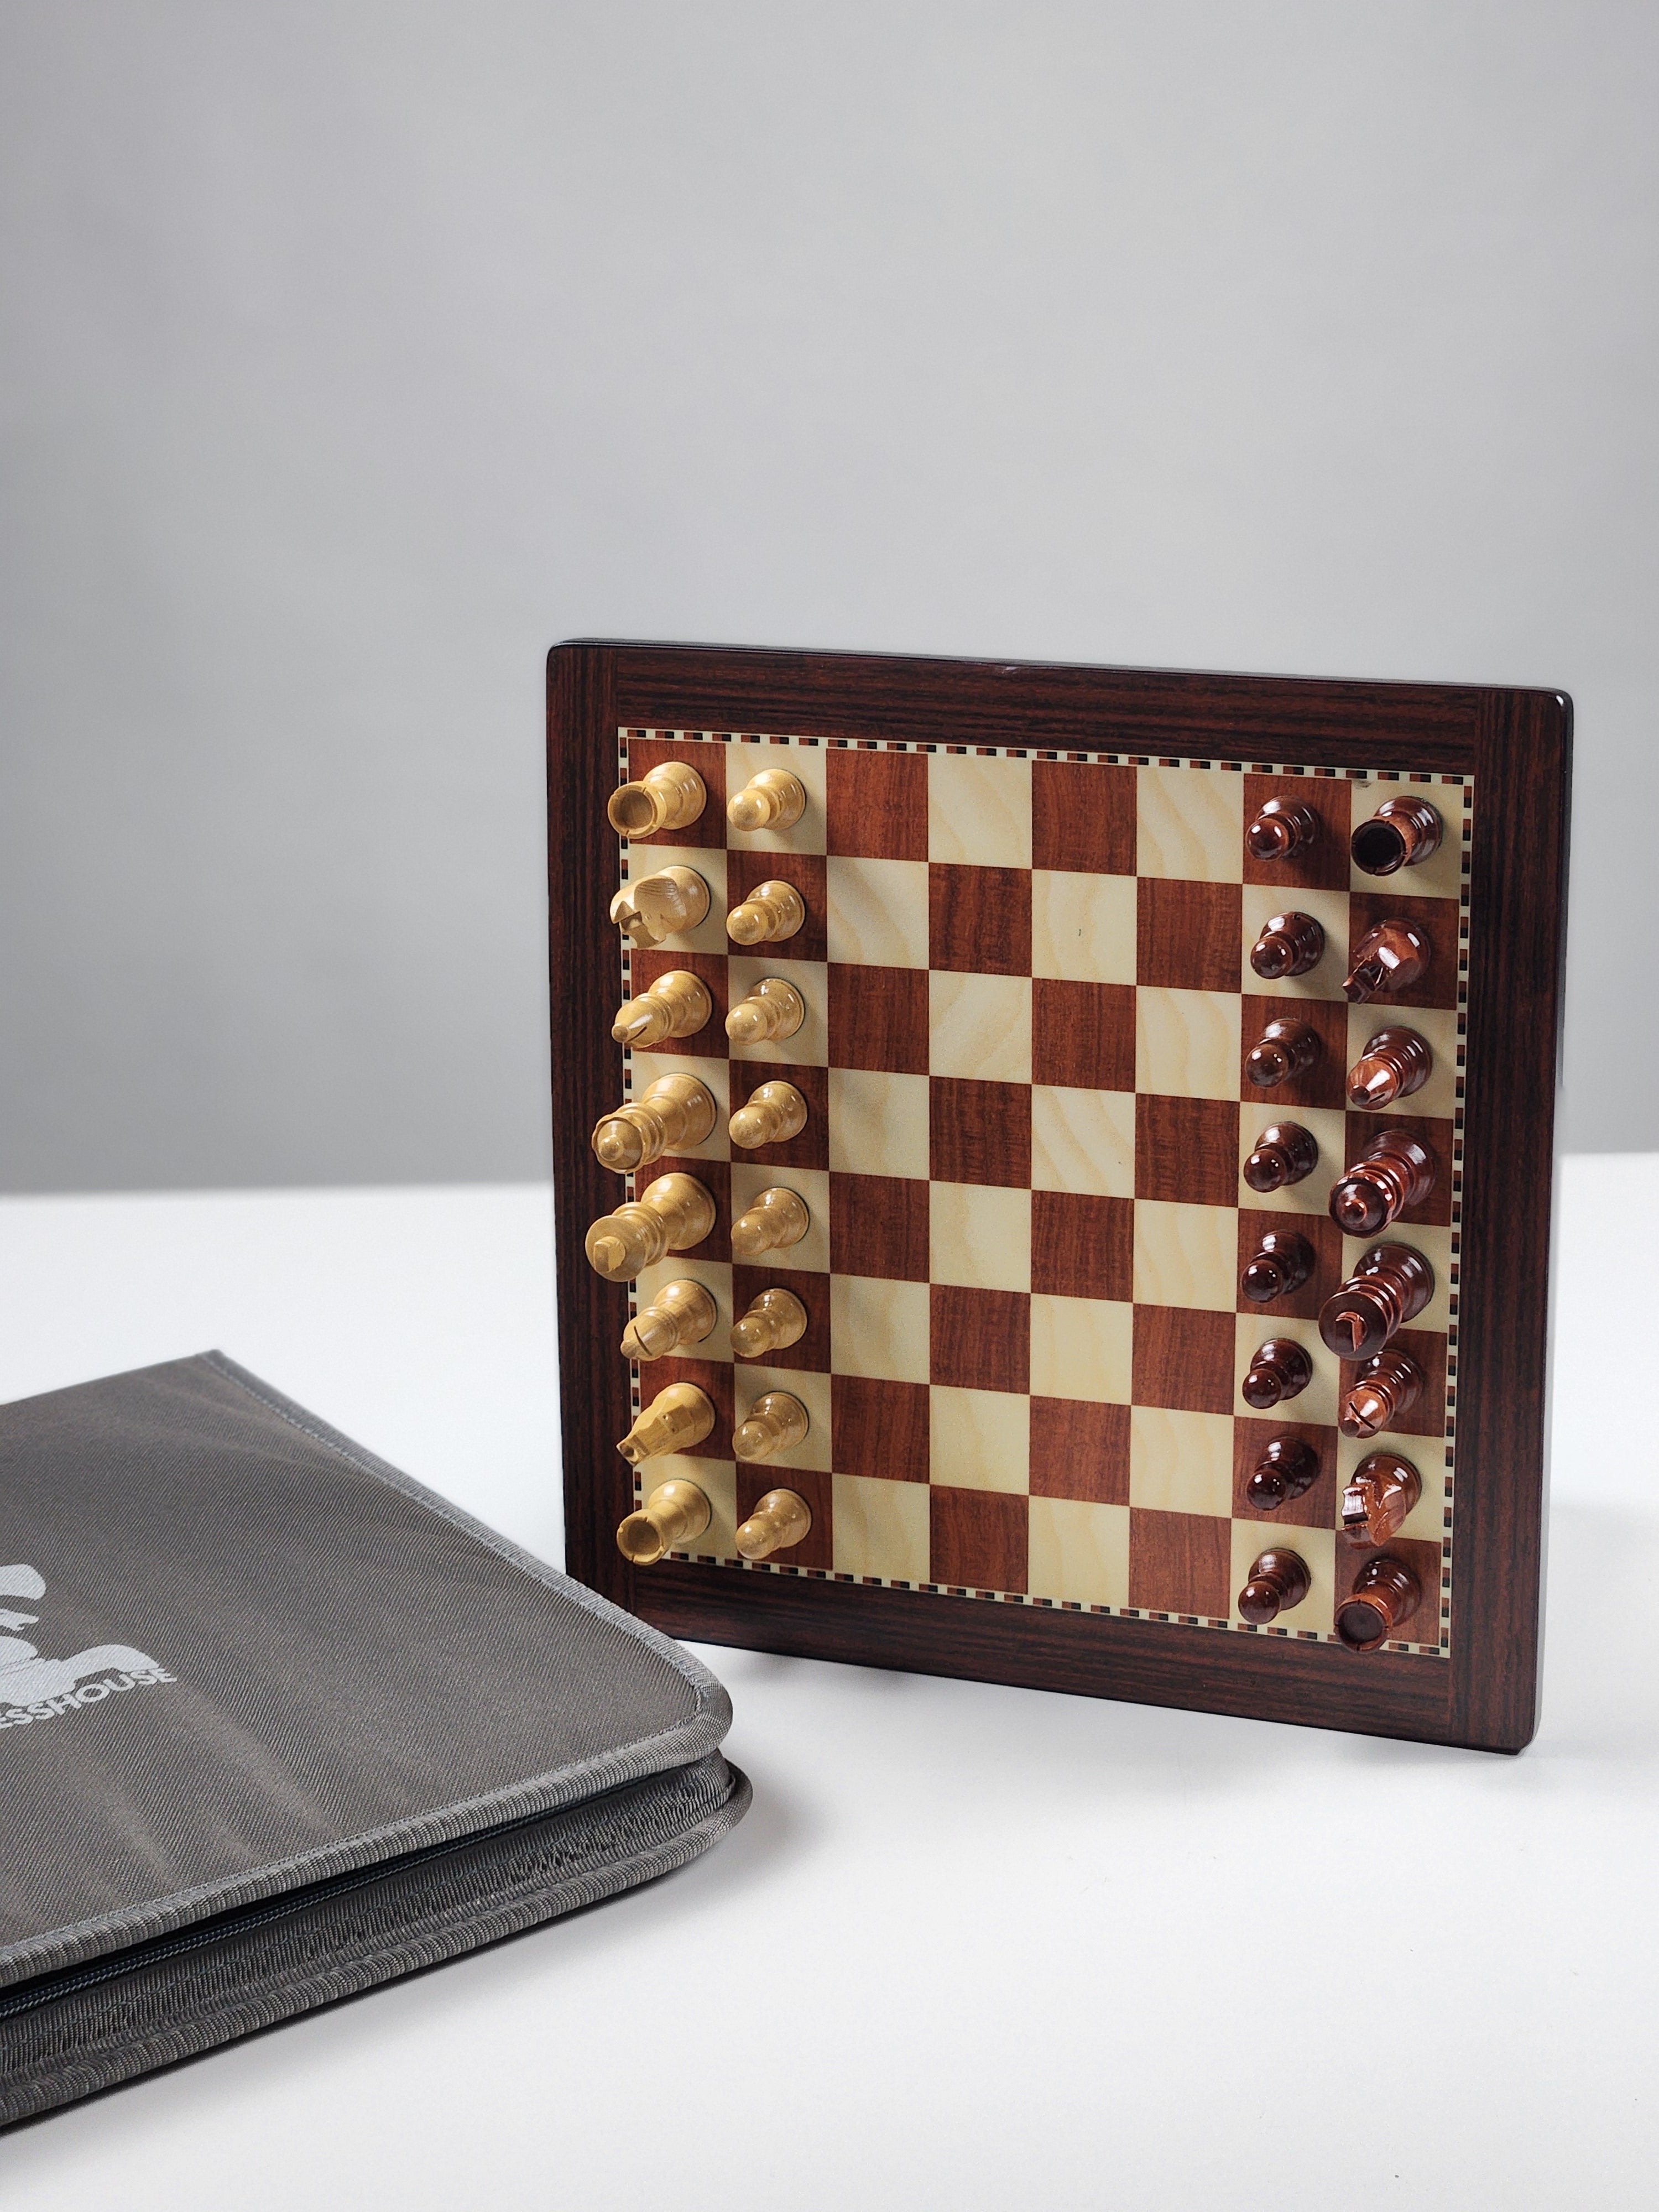 12" Magnetic Travel Chess Set in Rosewood with Grey Case and Tan Interior - Chess Set - Chess-House